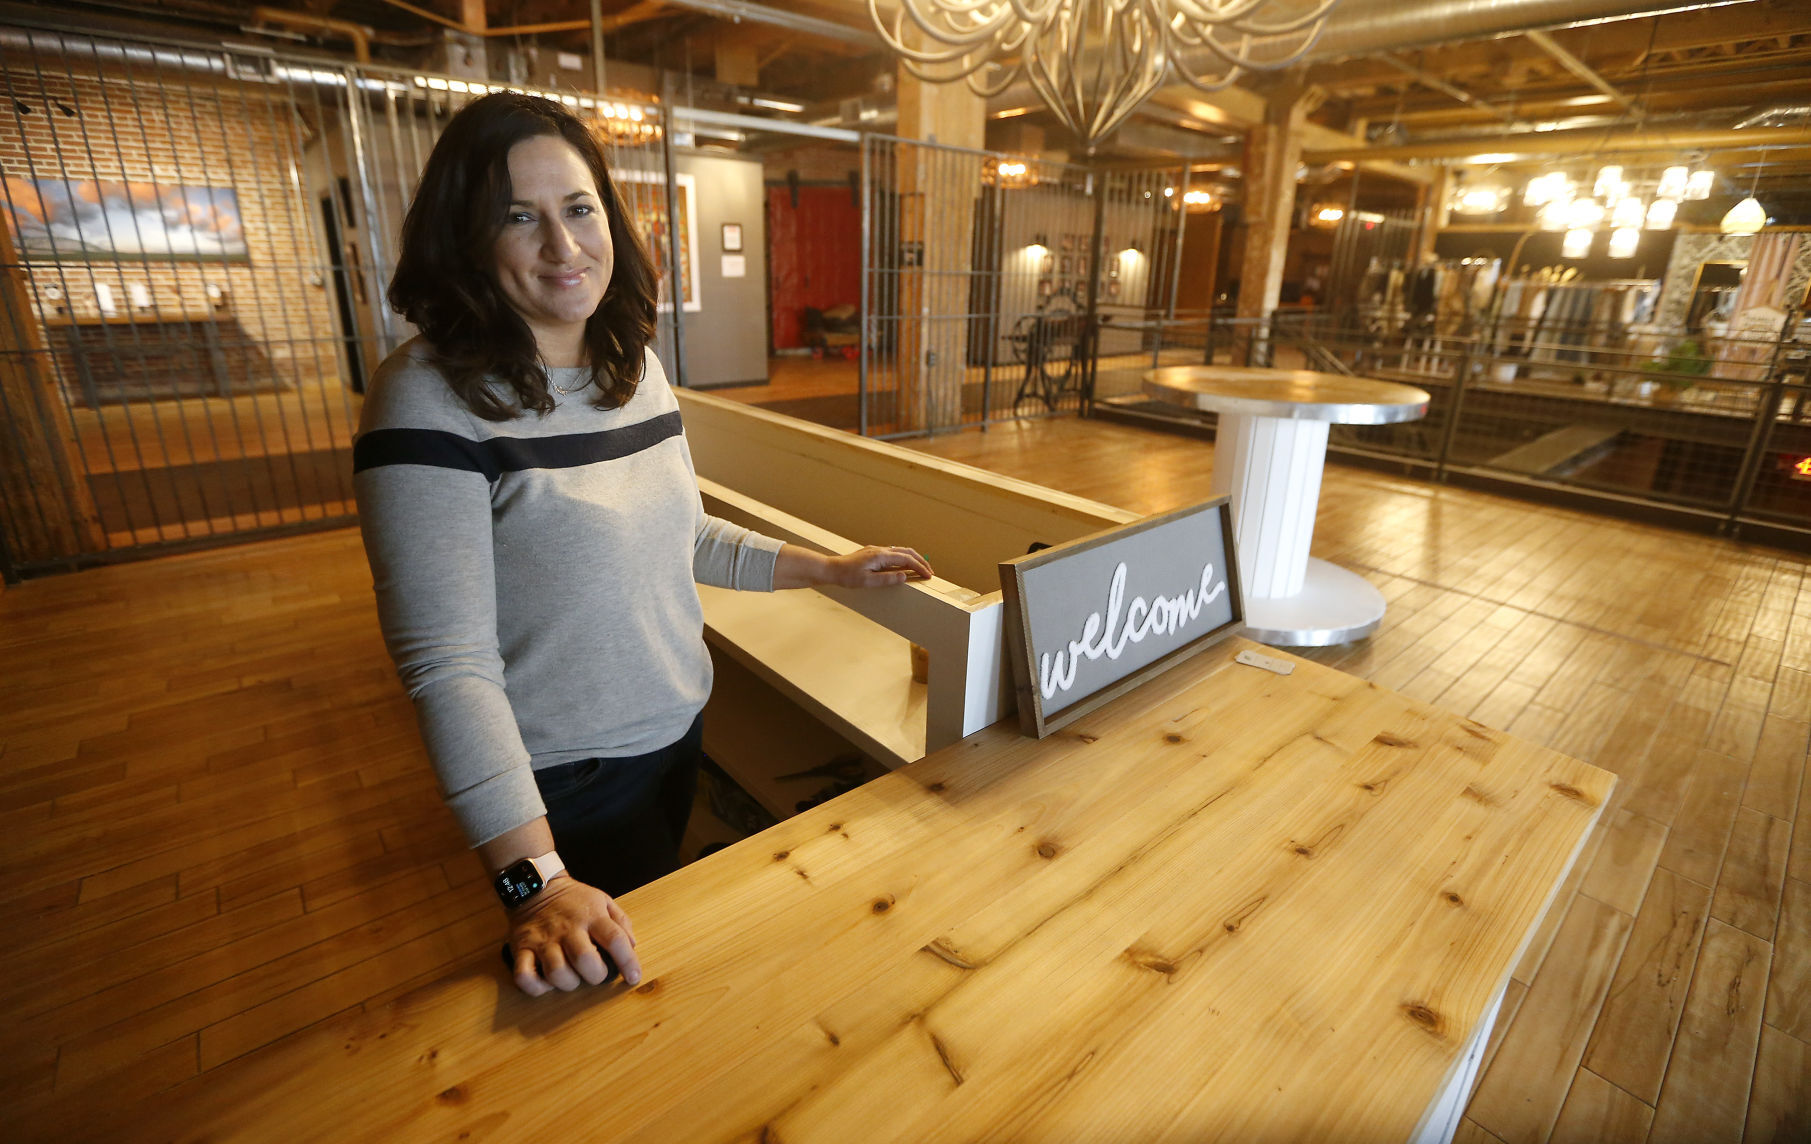 Anna Murray Francois, owner of Rustic Charm Decor Barn, is moving into the Novelty Iron Works building in downtown Dubuque. PHOTO CREDIT: Dave Kettering